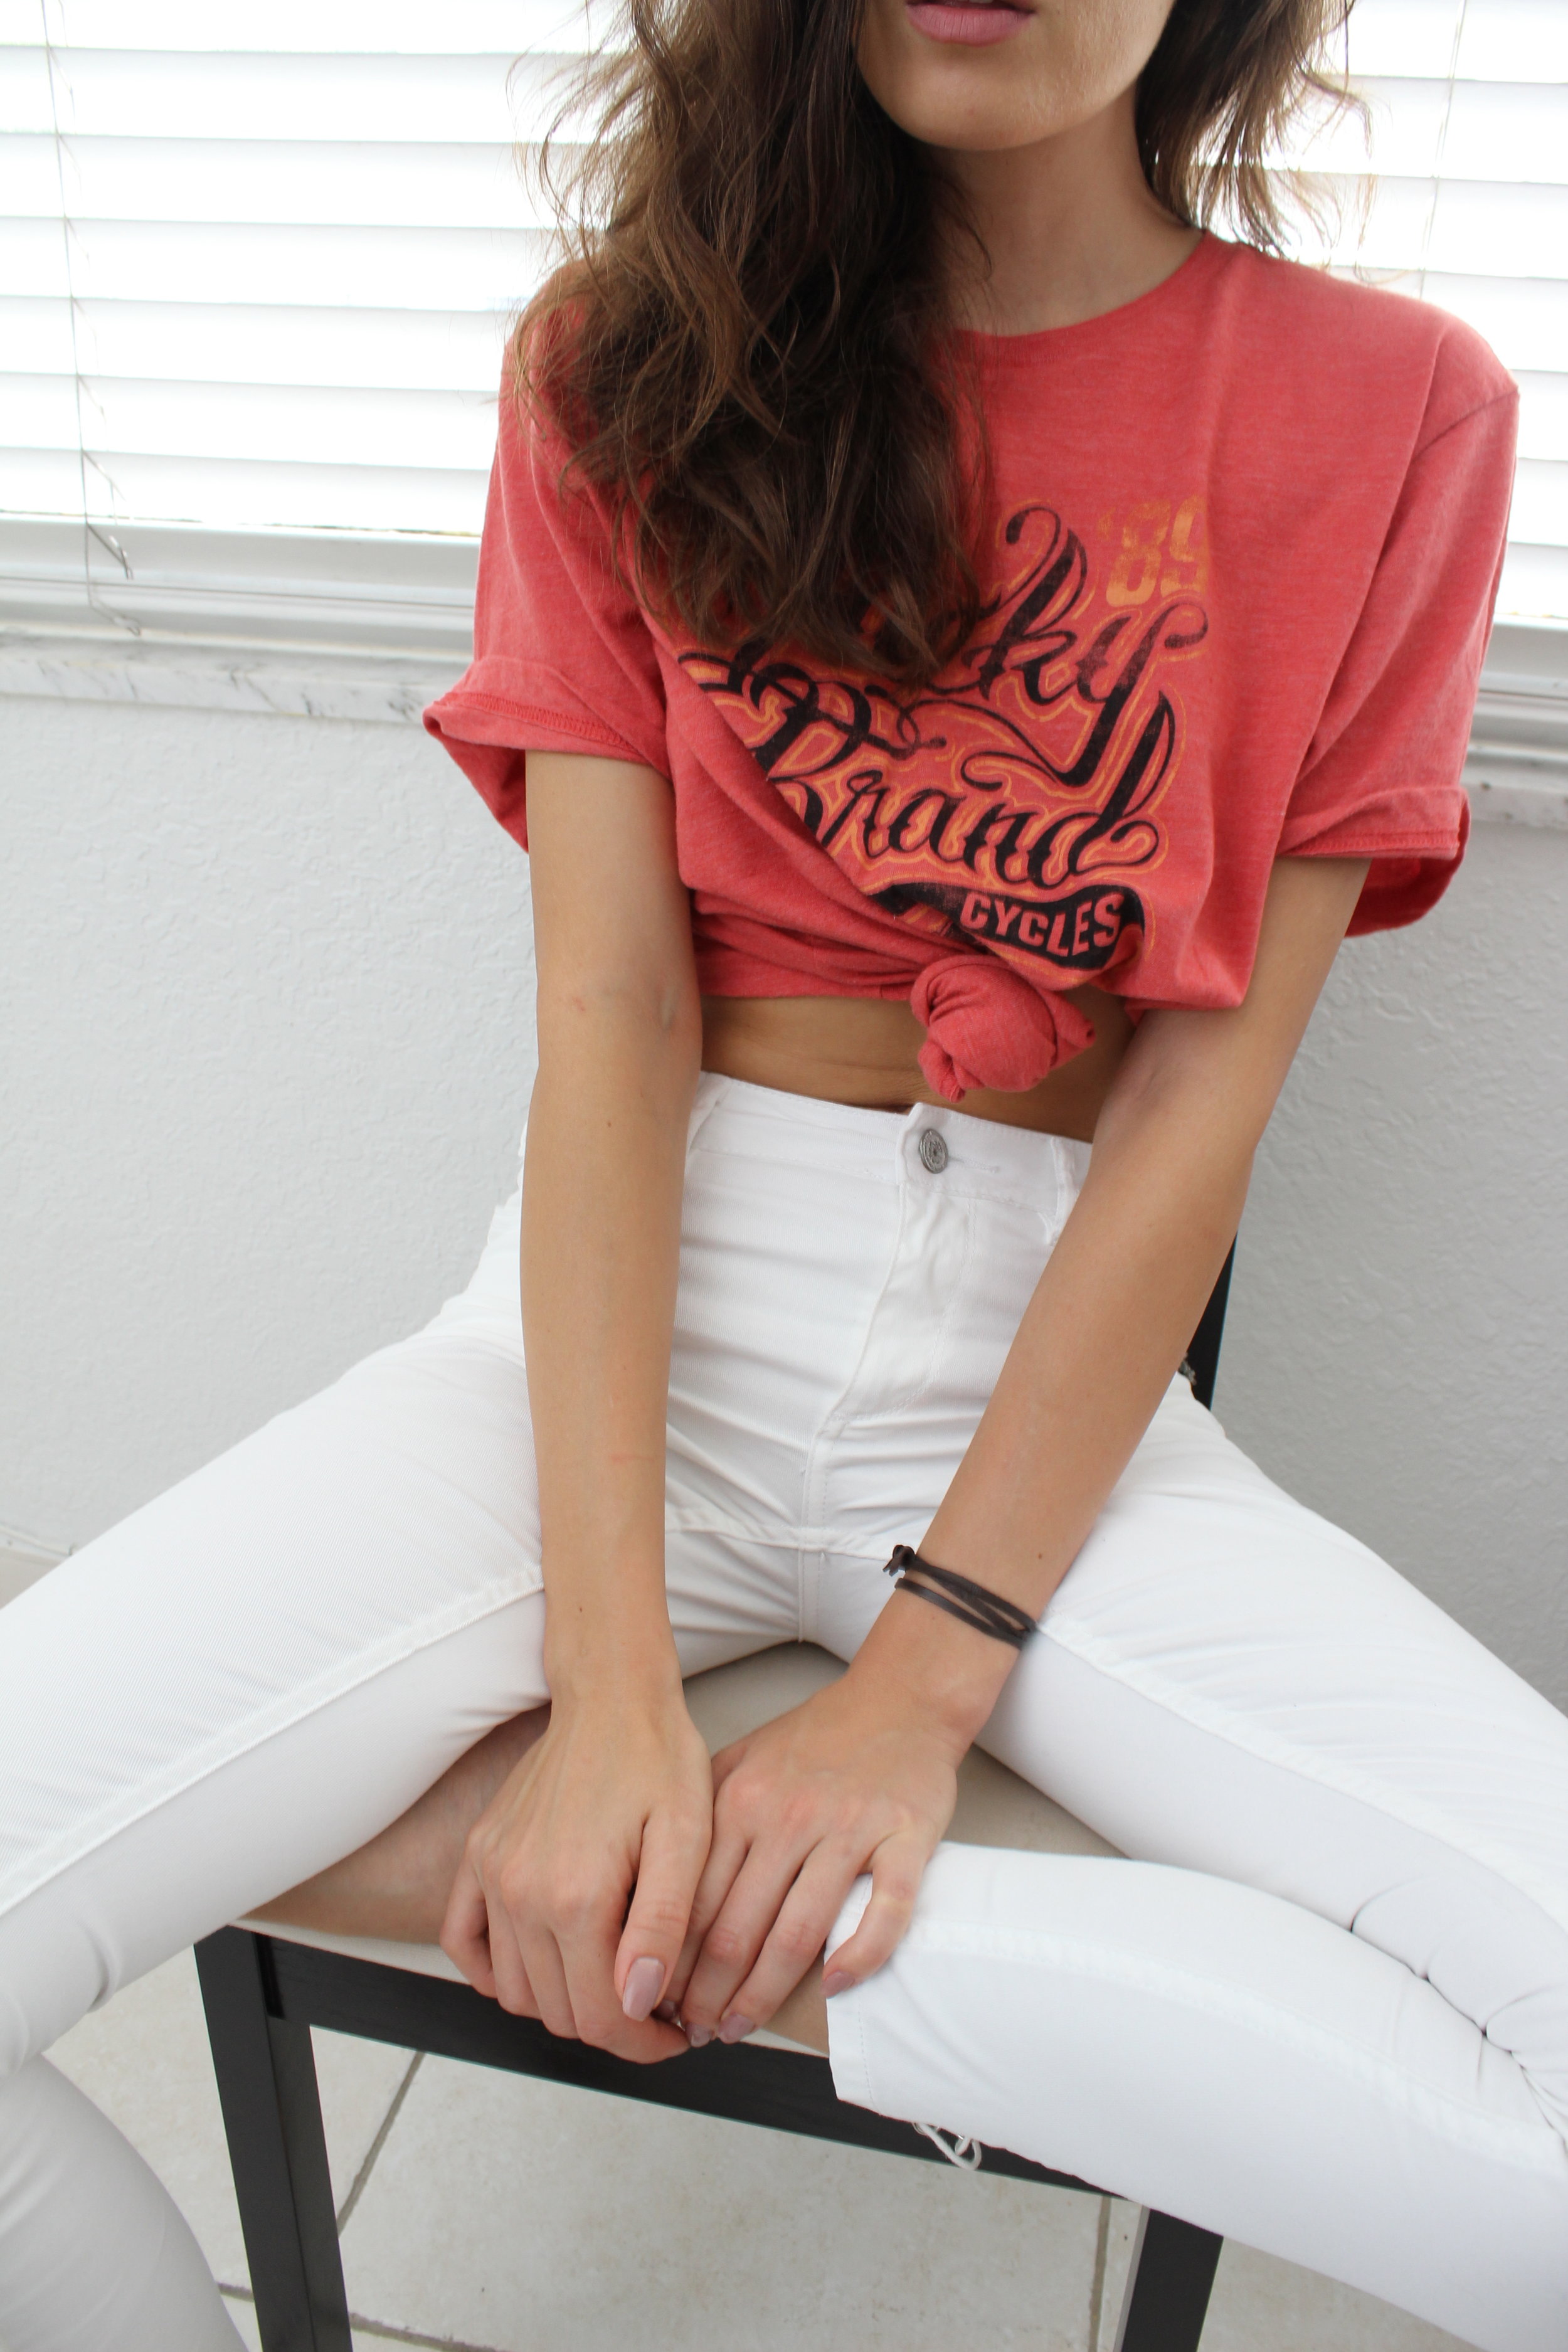 Red T-shirt white trousers fashion close-up photo